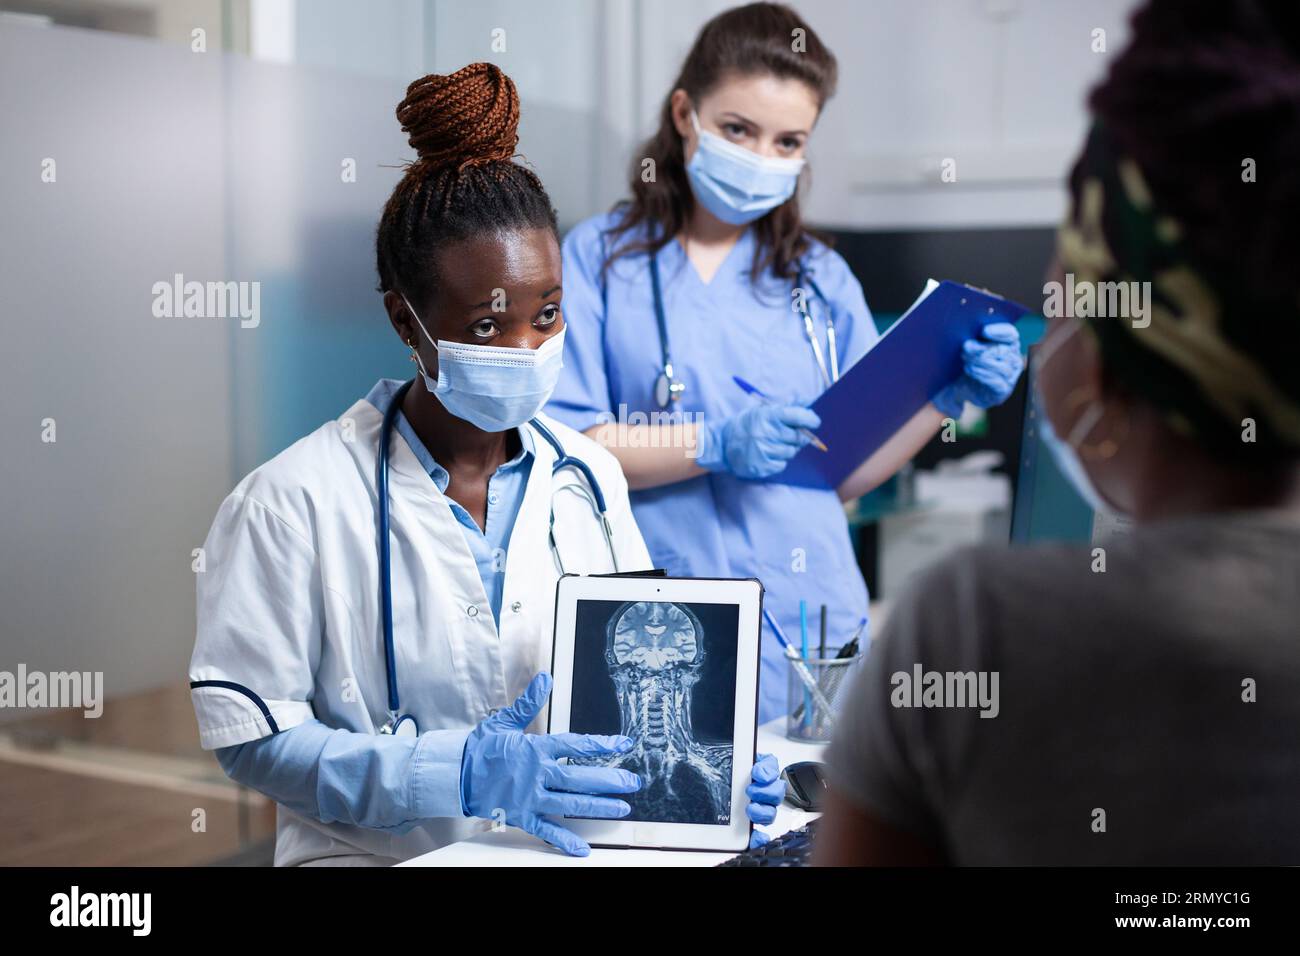 Radiologist and nurse delivering medical exam results to patient using x-ray cervical vertebrae ct scan to diagnose bone injury. Doctor medical checkup visit in sanitary sterile clinic Stock Photo